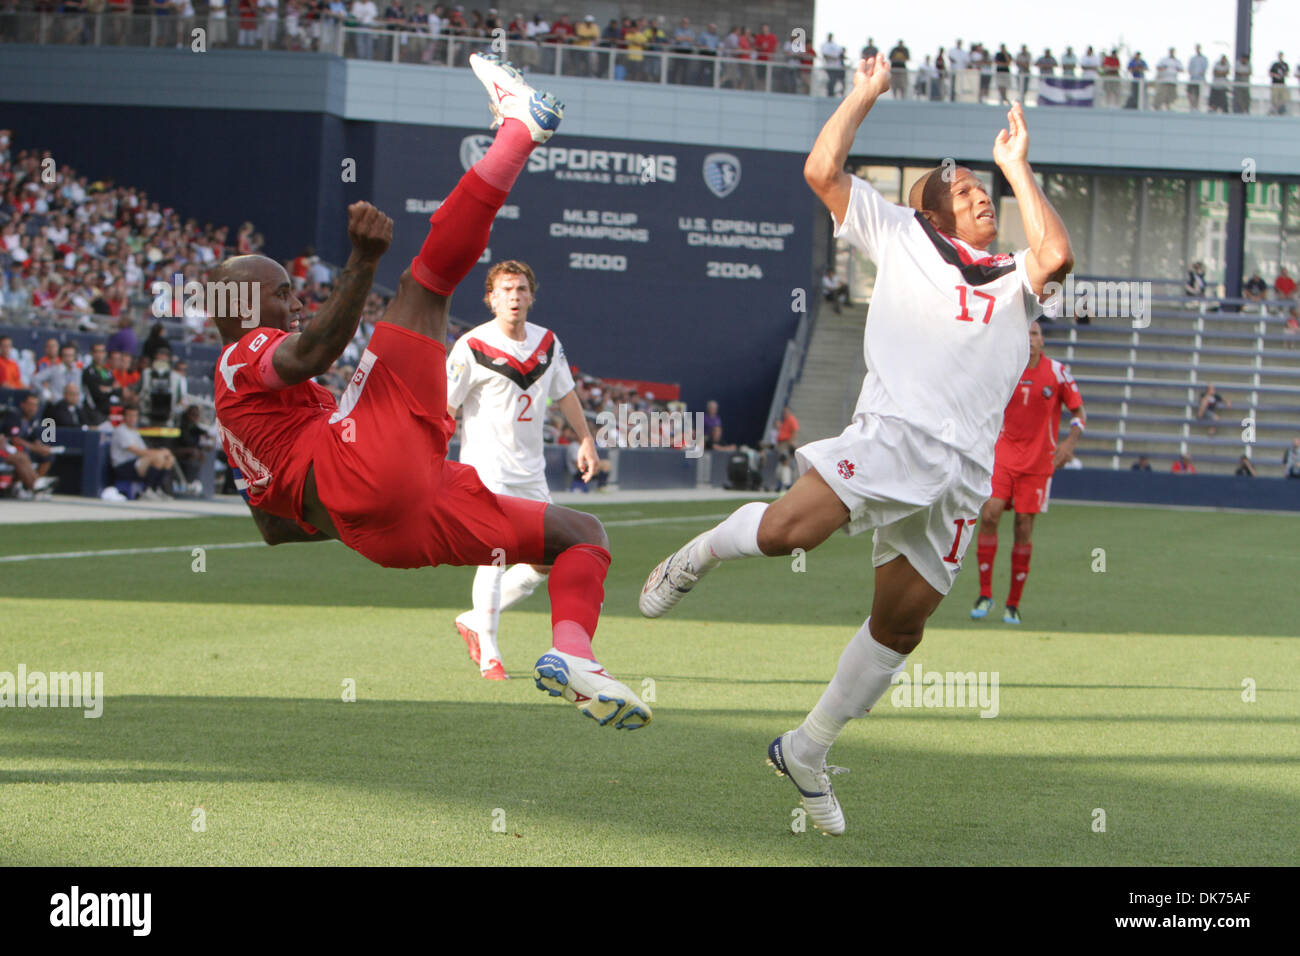 June 14, 2011 - Kansas City, KANSAS, U.S - Panama defender Felipe Baloy (23) high kicks a ball as Canada forward Simeon Jackson (17) goes for the ball in the match between Panama and Canada in Group C play of the 2011 CONCACAF Gold Cup at Livestrong Sporting Park in Kansas City, Kansas. Panama and Canada tied 1-1. (Credit Image: © James Allison/Southcreek Global/ZUMAPRESS.com) Stock Photo